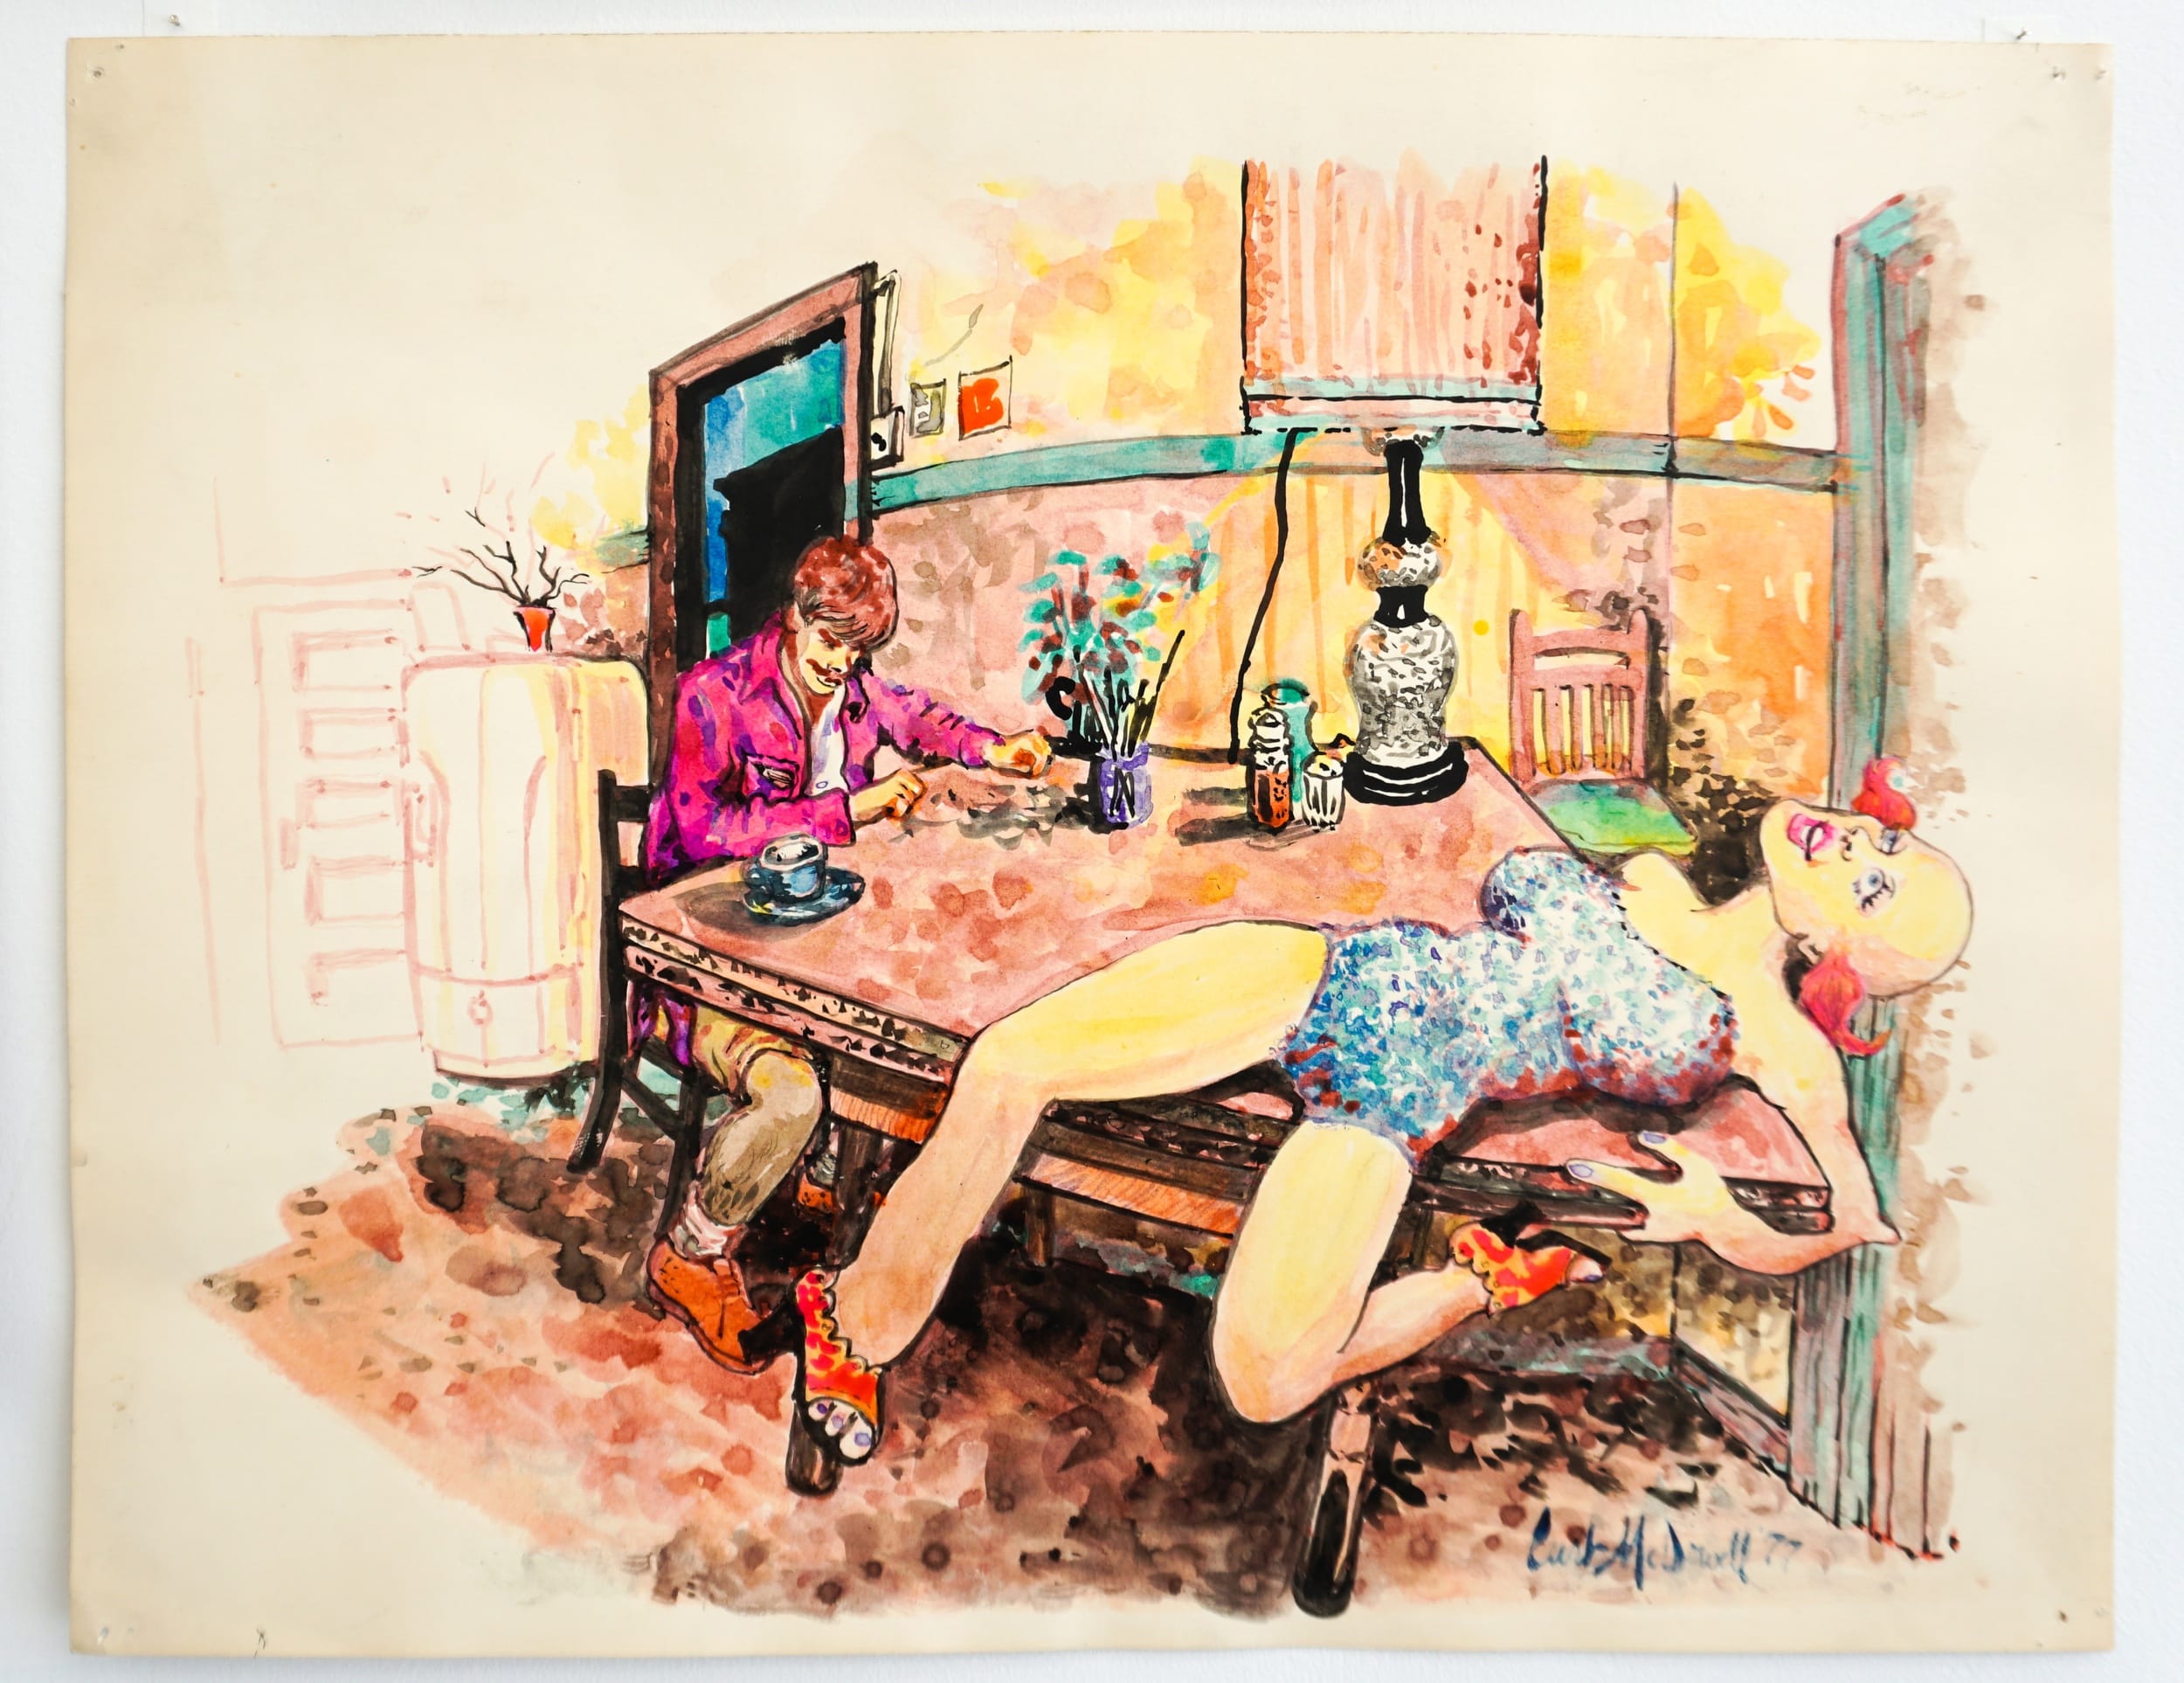  Curt McDowell  Untitled (Robert and Loretta) , 1977 Watercolor on paper 11 x 14 inches 